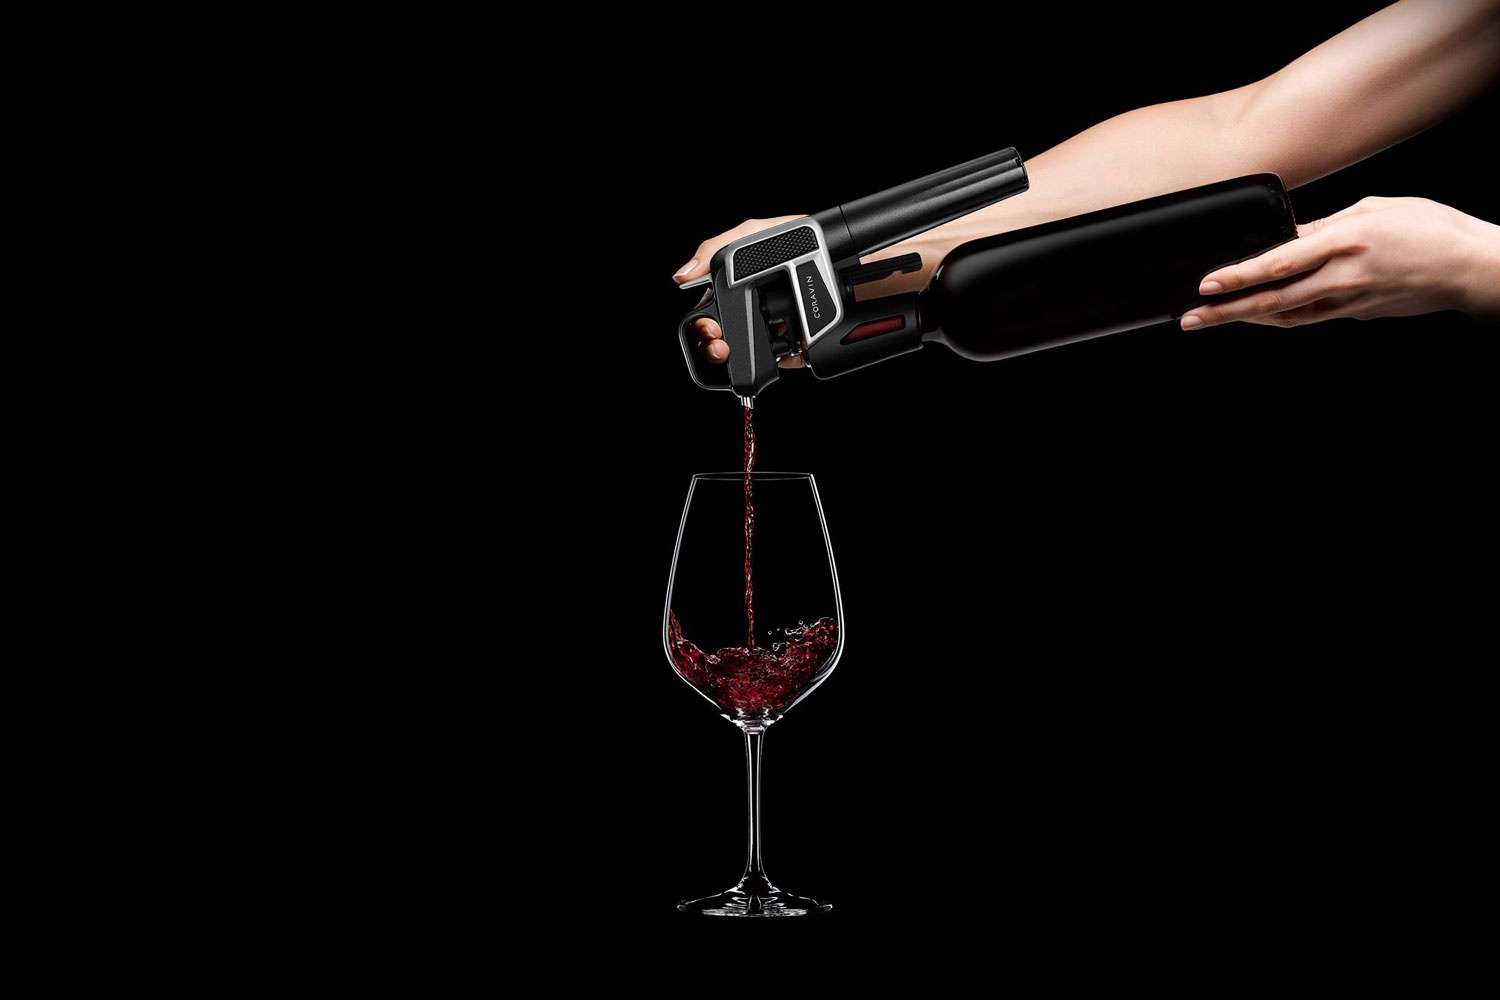 The Coravin wine opener and pourer.